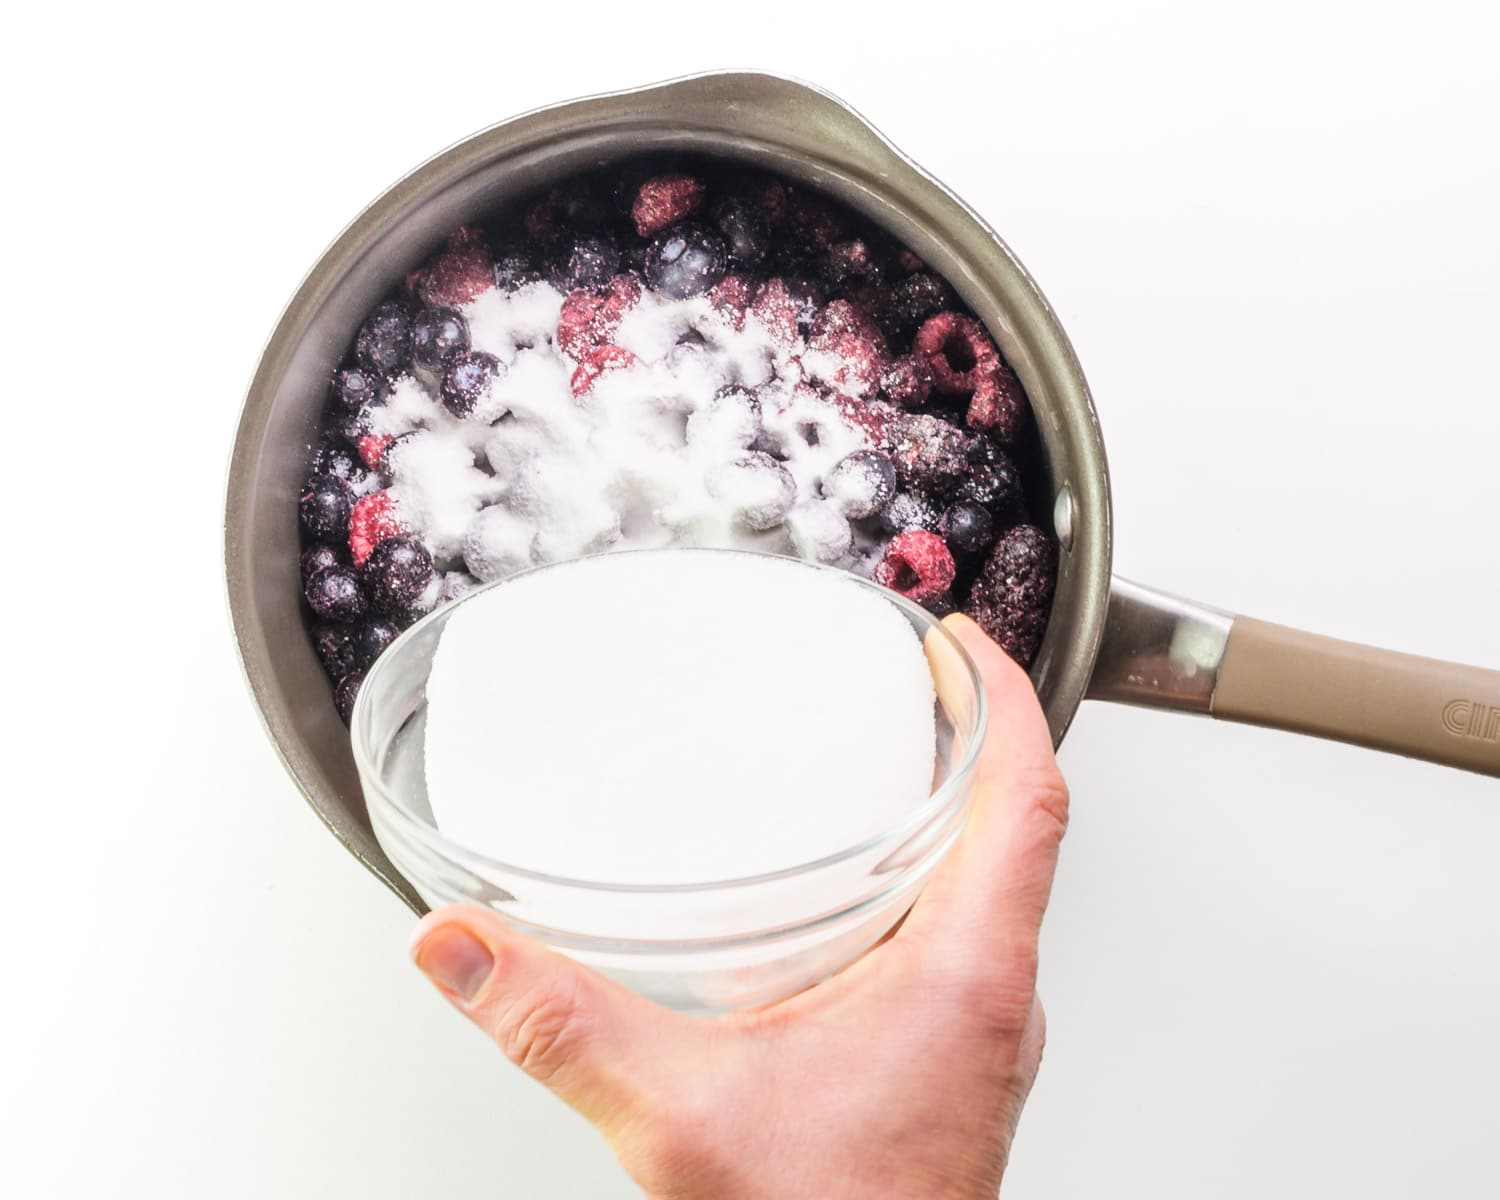 Pouring sugar into a saucepan with mixed berries.